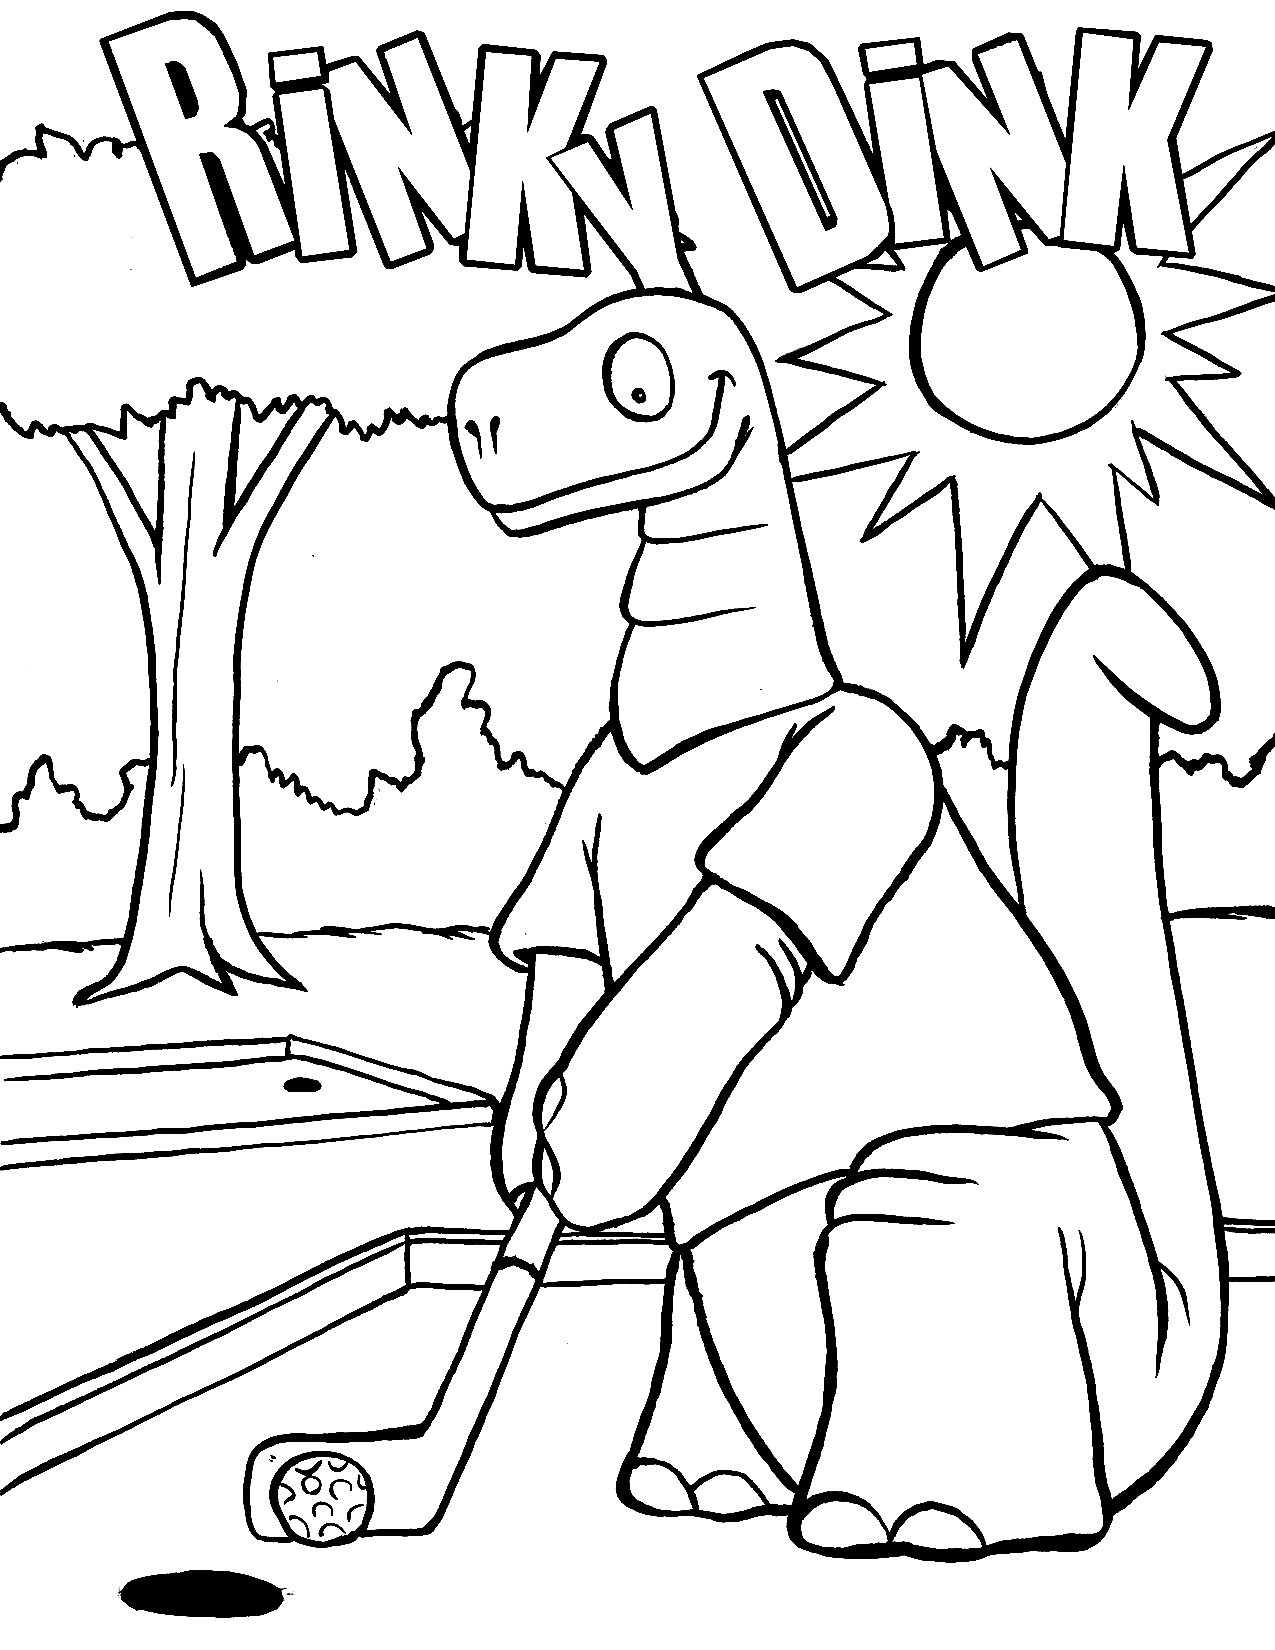 Dinosaur Playing Golf Coloring Pages